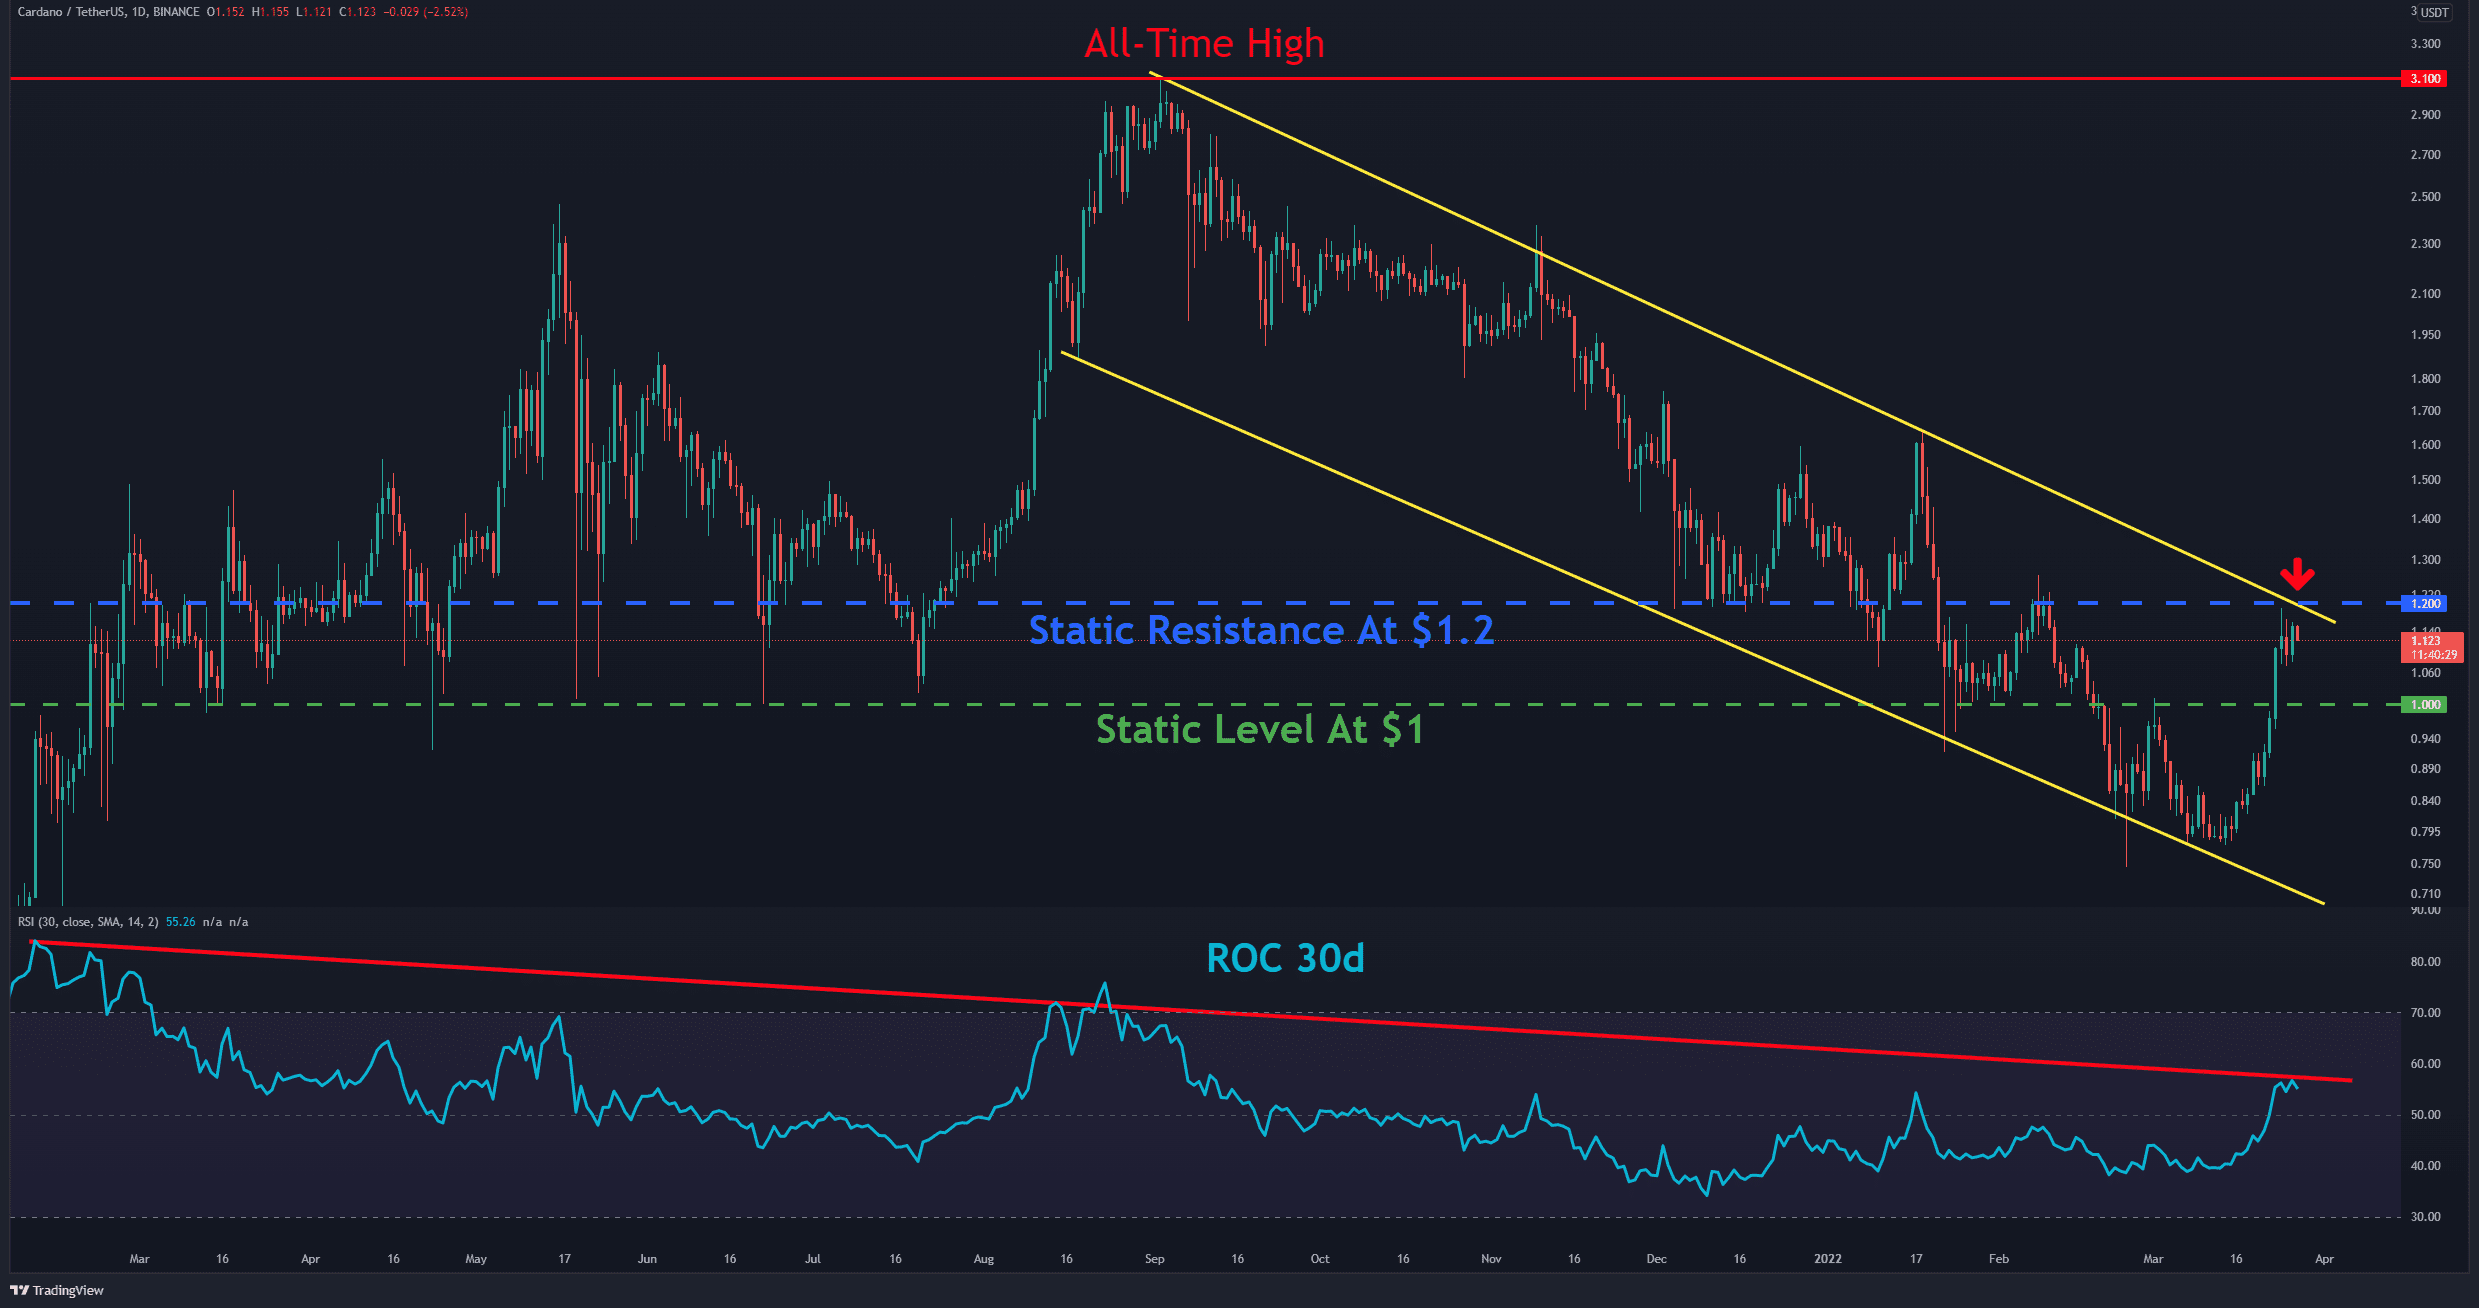 Cardano-price-analysis:-ada-building-bullish-cup-&-handle-pattern-with-target-at-$1.5